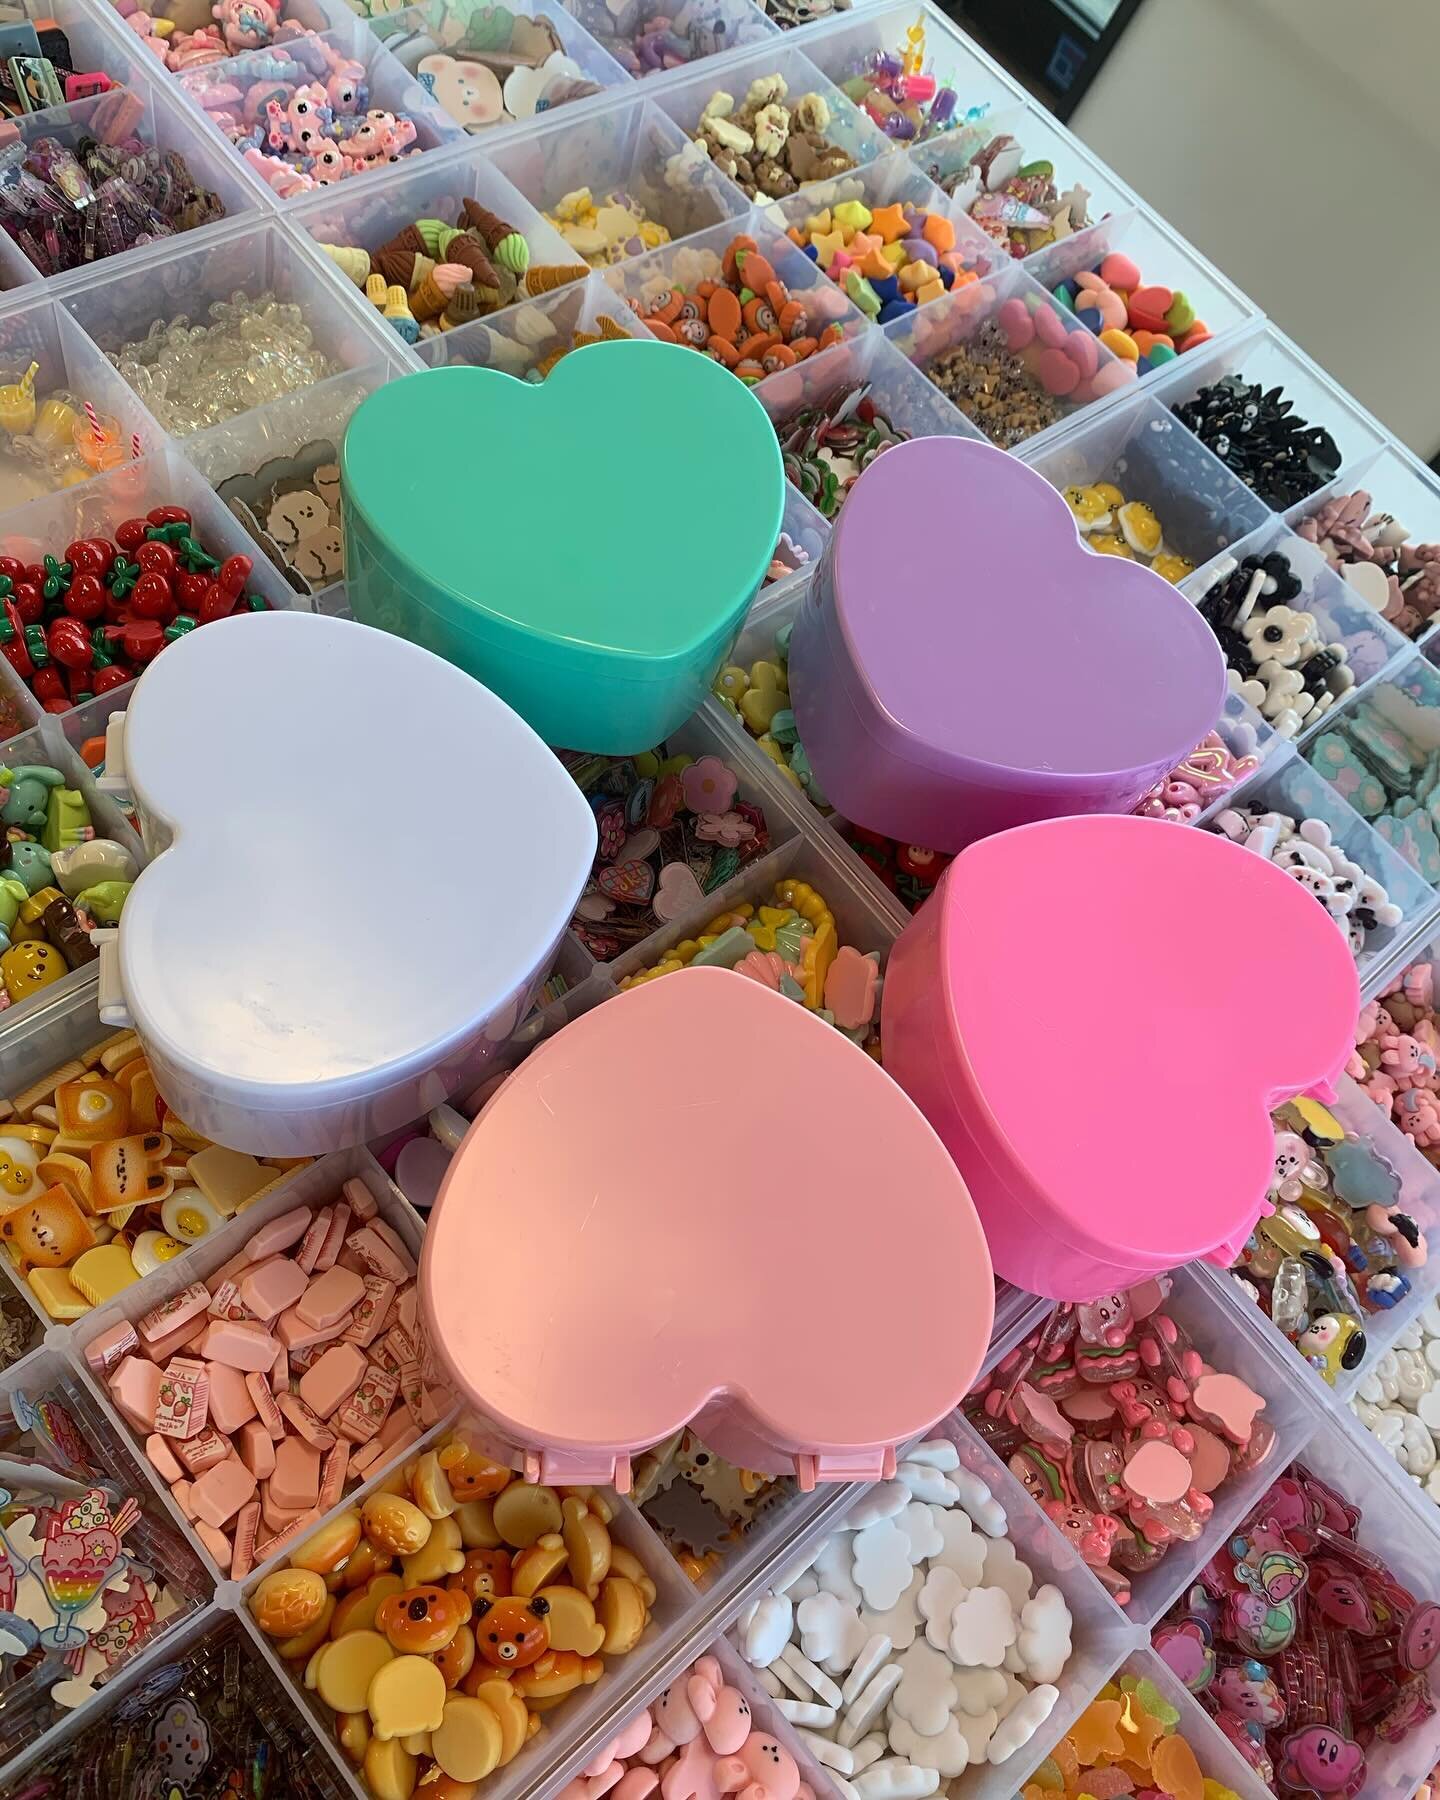 New jewelry box colors are in! 🌈 (pink, hot pink, purple, teal, white)